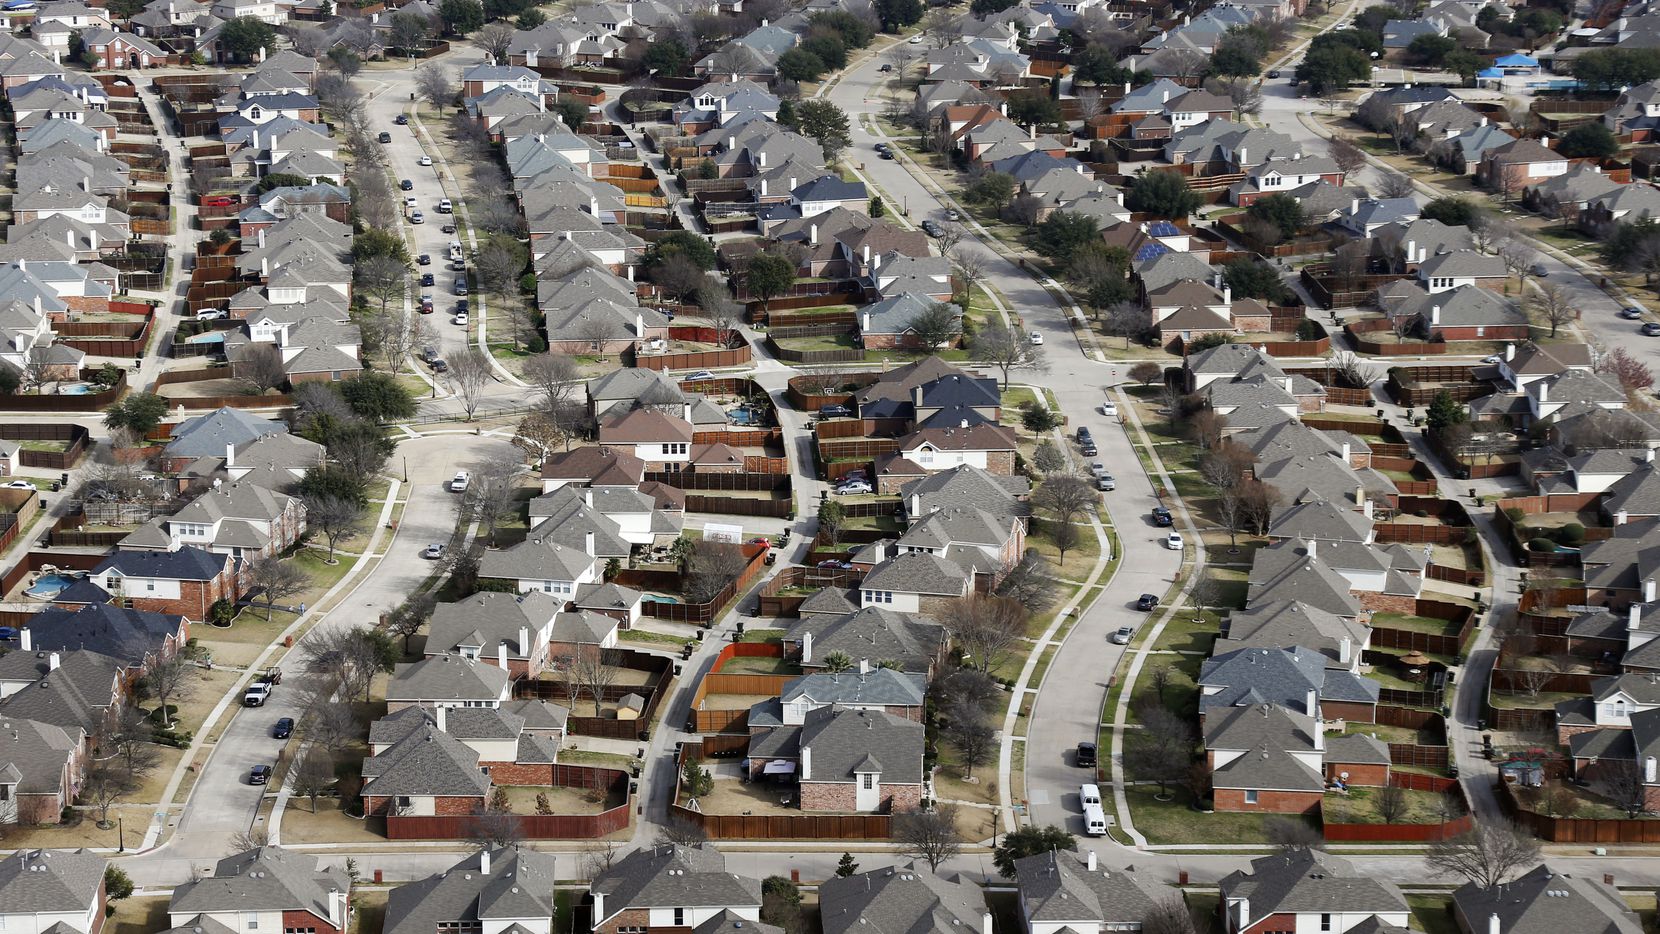 An aerial shot in 2019 shows rows of homes in Plano.